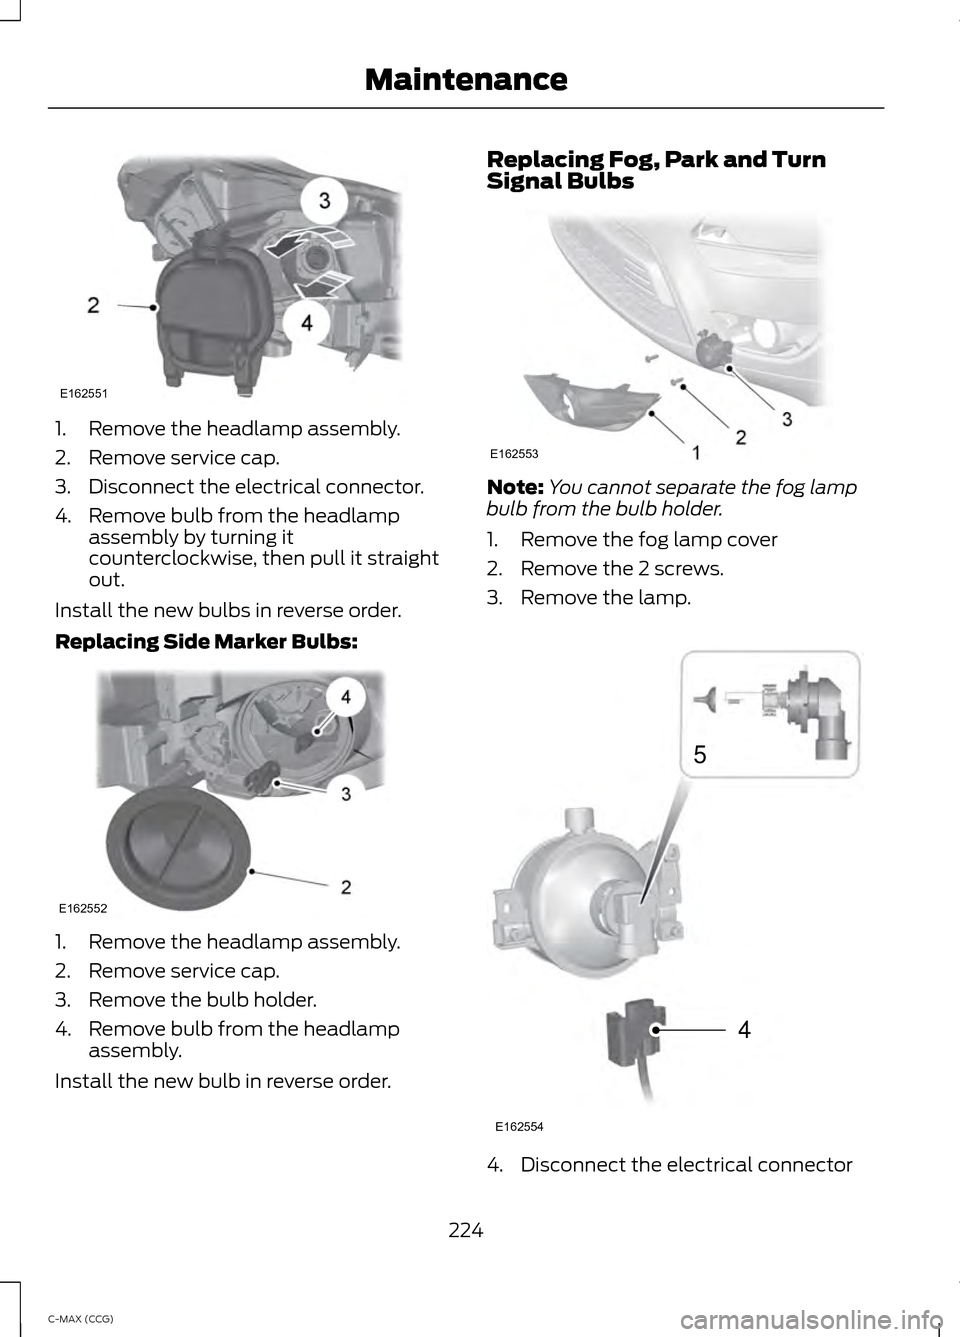 FORD C MAX HYBRID 2014 2.G Owners Guide 1. Remove the headlamp assembly.
2. Remove service cap.
3. Disconnect the electrical connector.
4. Remove bulb from the headlamp
assembly by turning it
counterclockwise, then pull it straight
out.
Ins